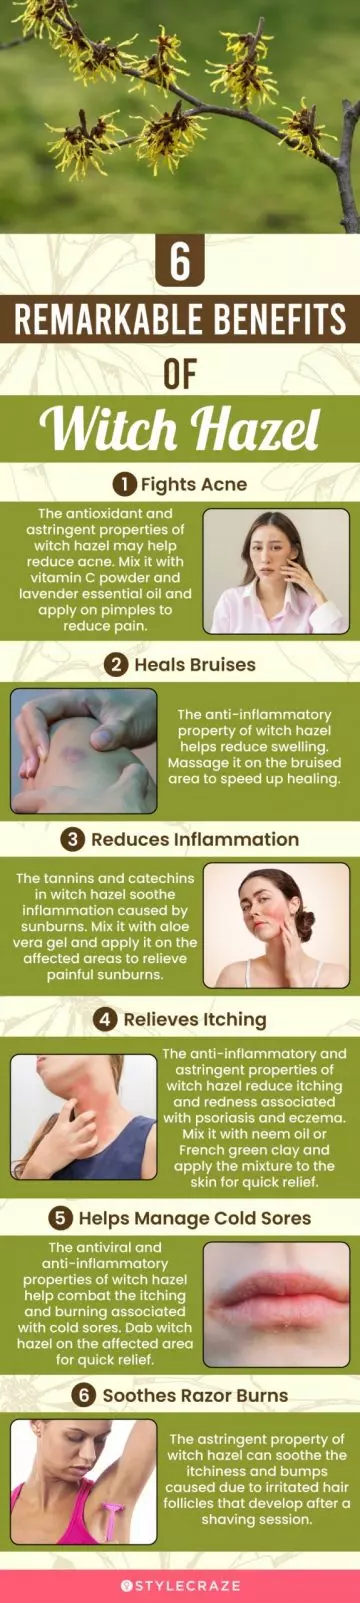 6 remarkable benefits of witch hazel (infographic)